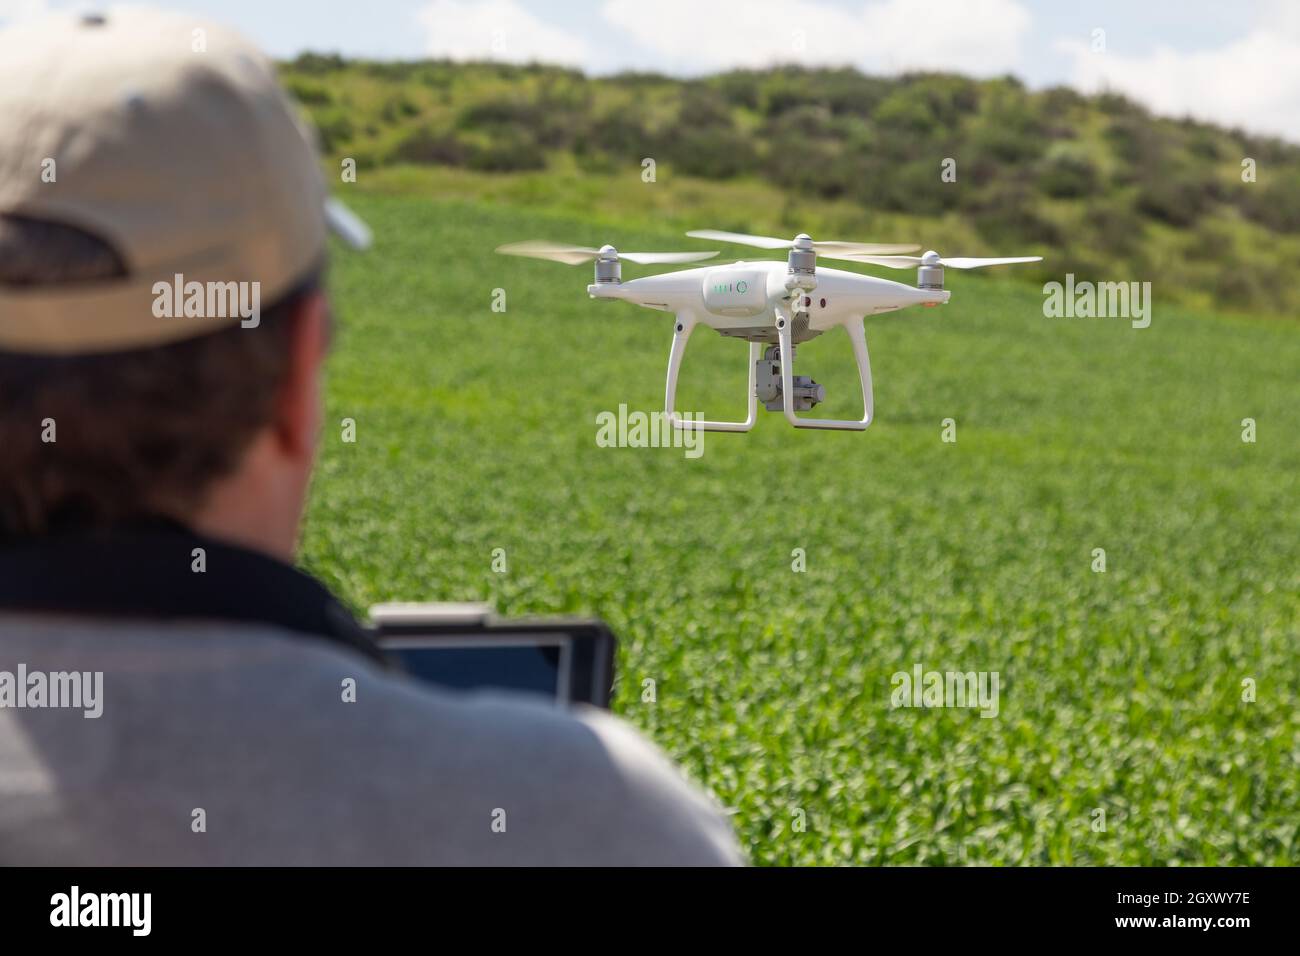 UAV Drone Flying and Gathering Over Country Farm Land Photo - Alamy